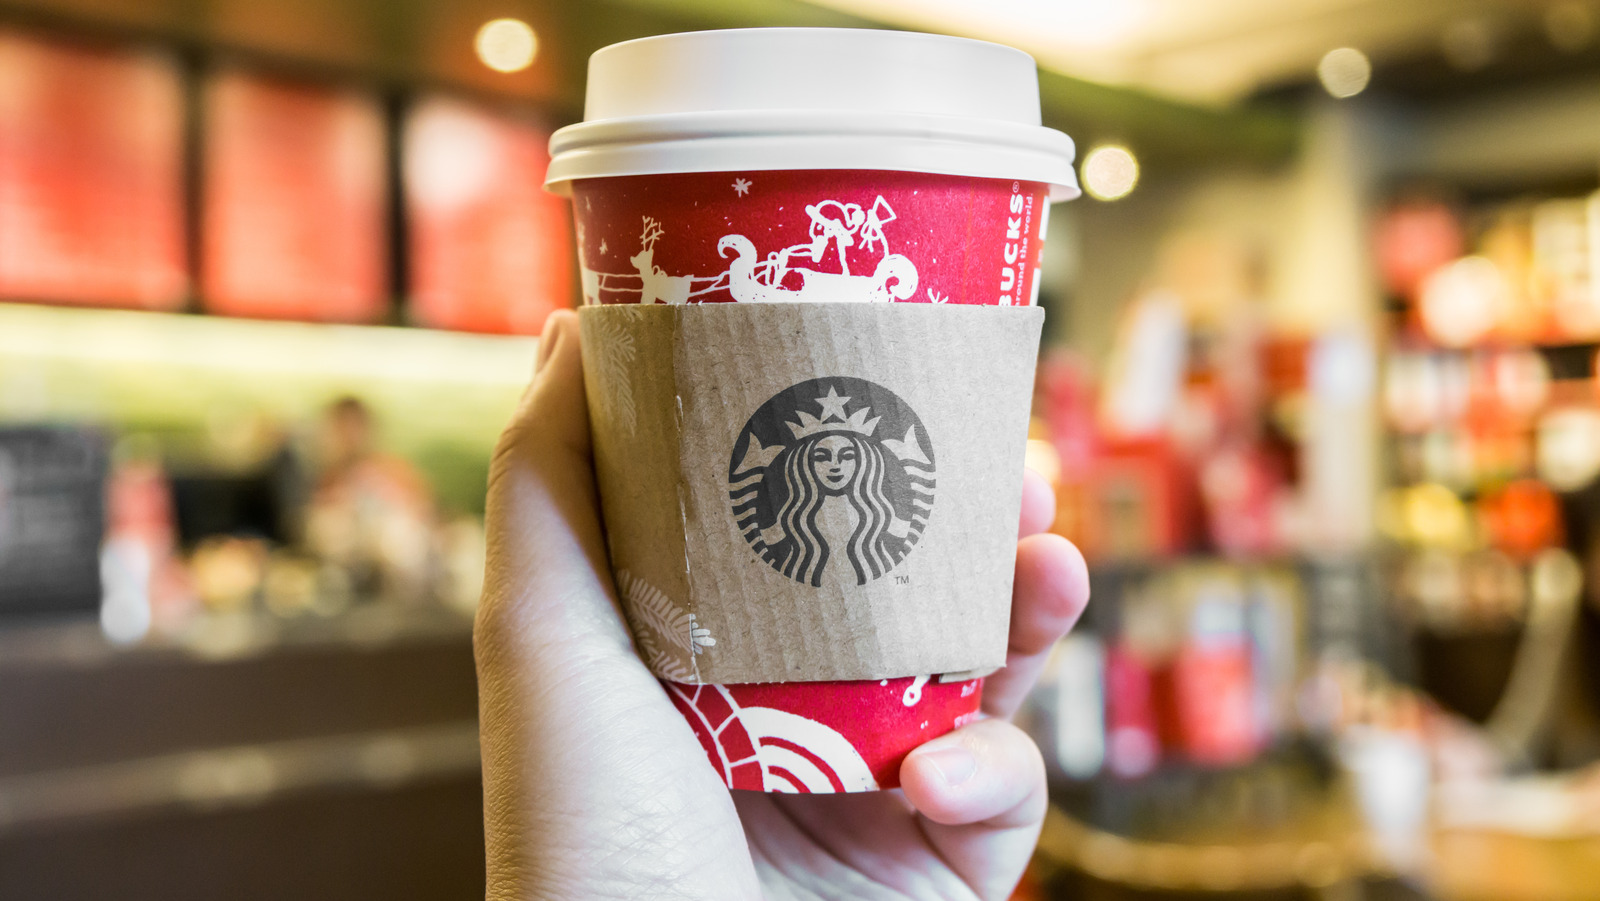 https://www.thelist.com/img/gallery/heres-when-you-can-expect-starbucks-red-cups-to-make-a-triumphant-return/l-intro-1664395005.jpg